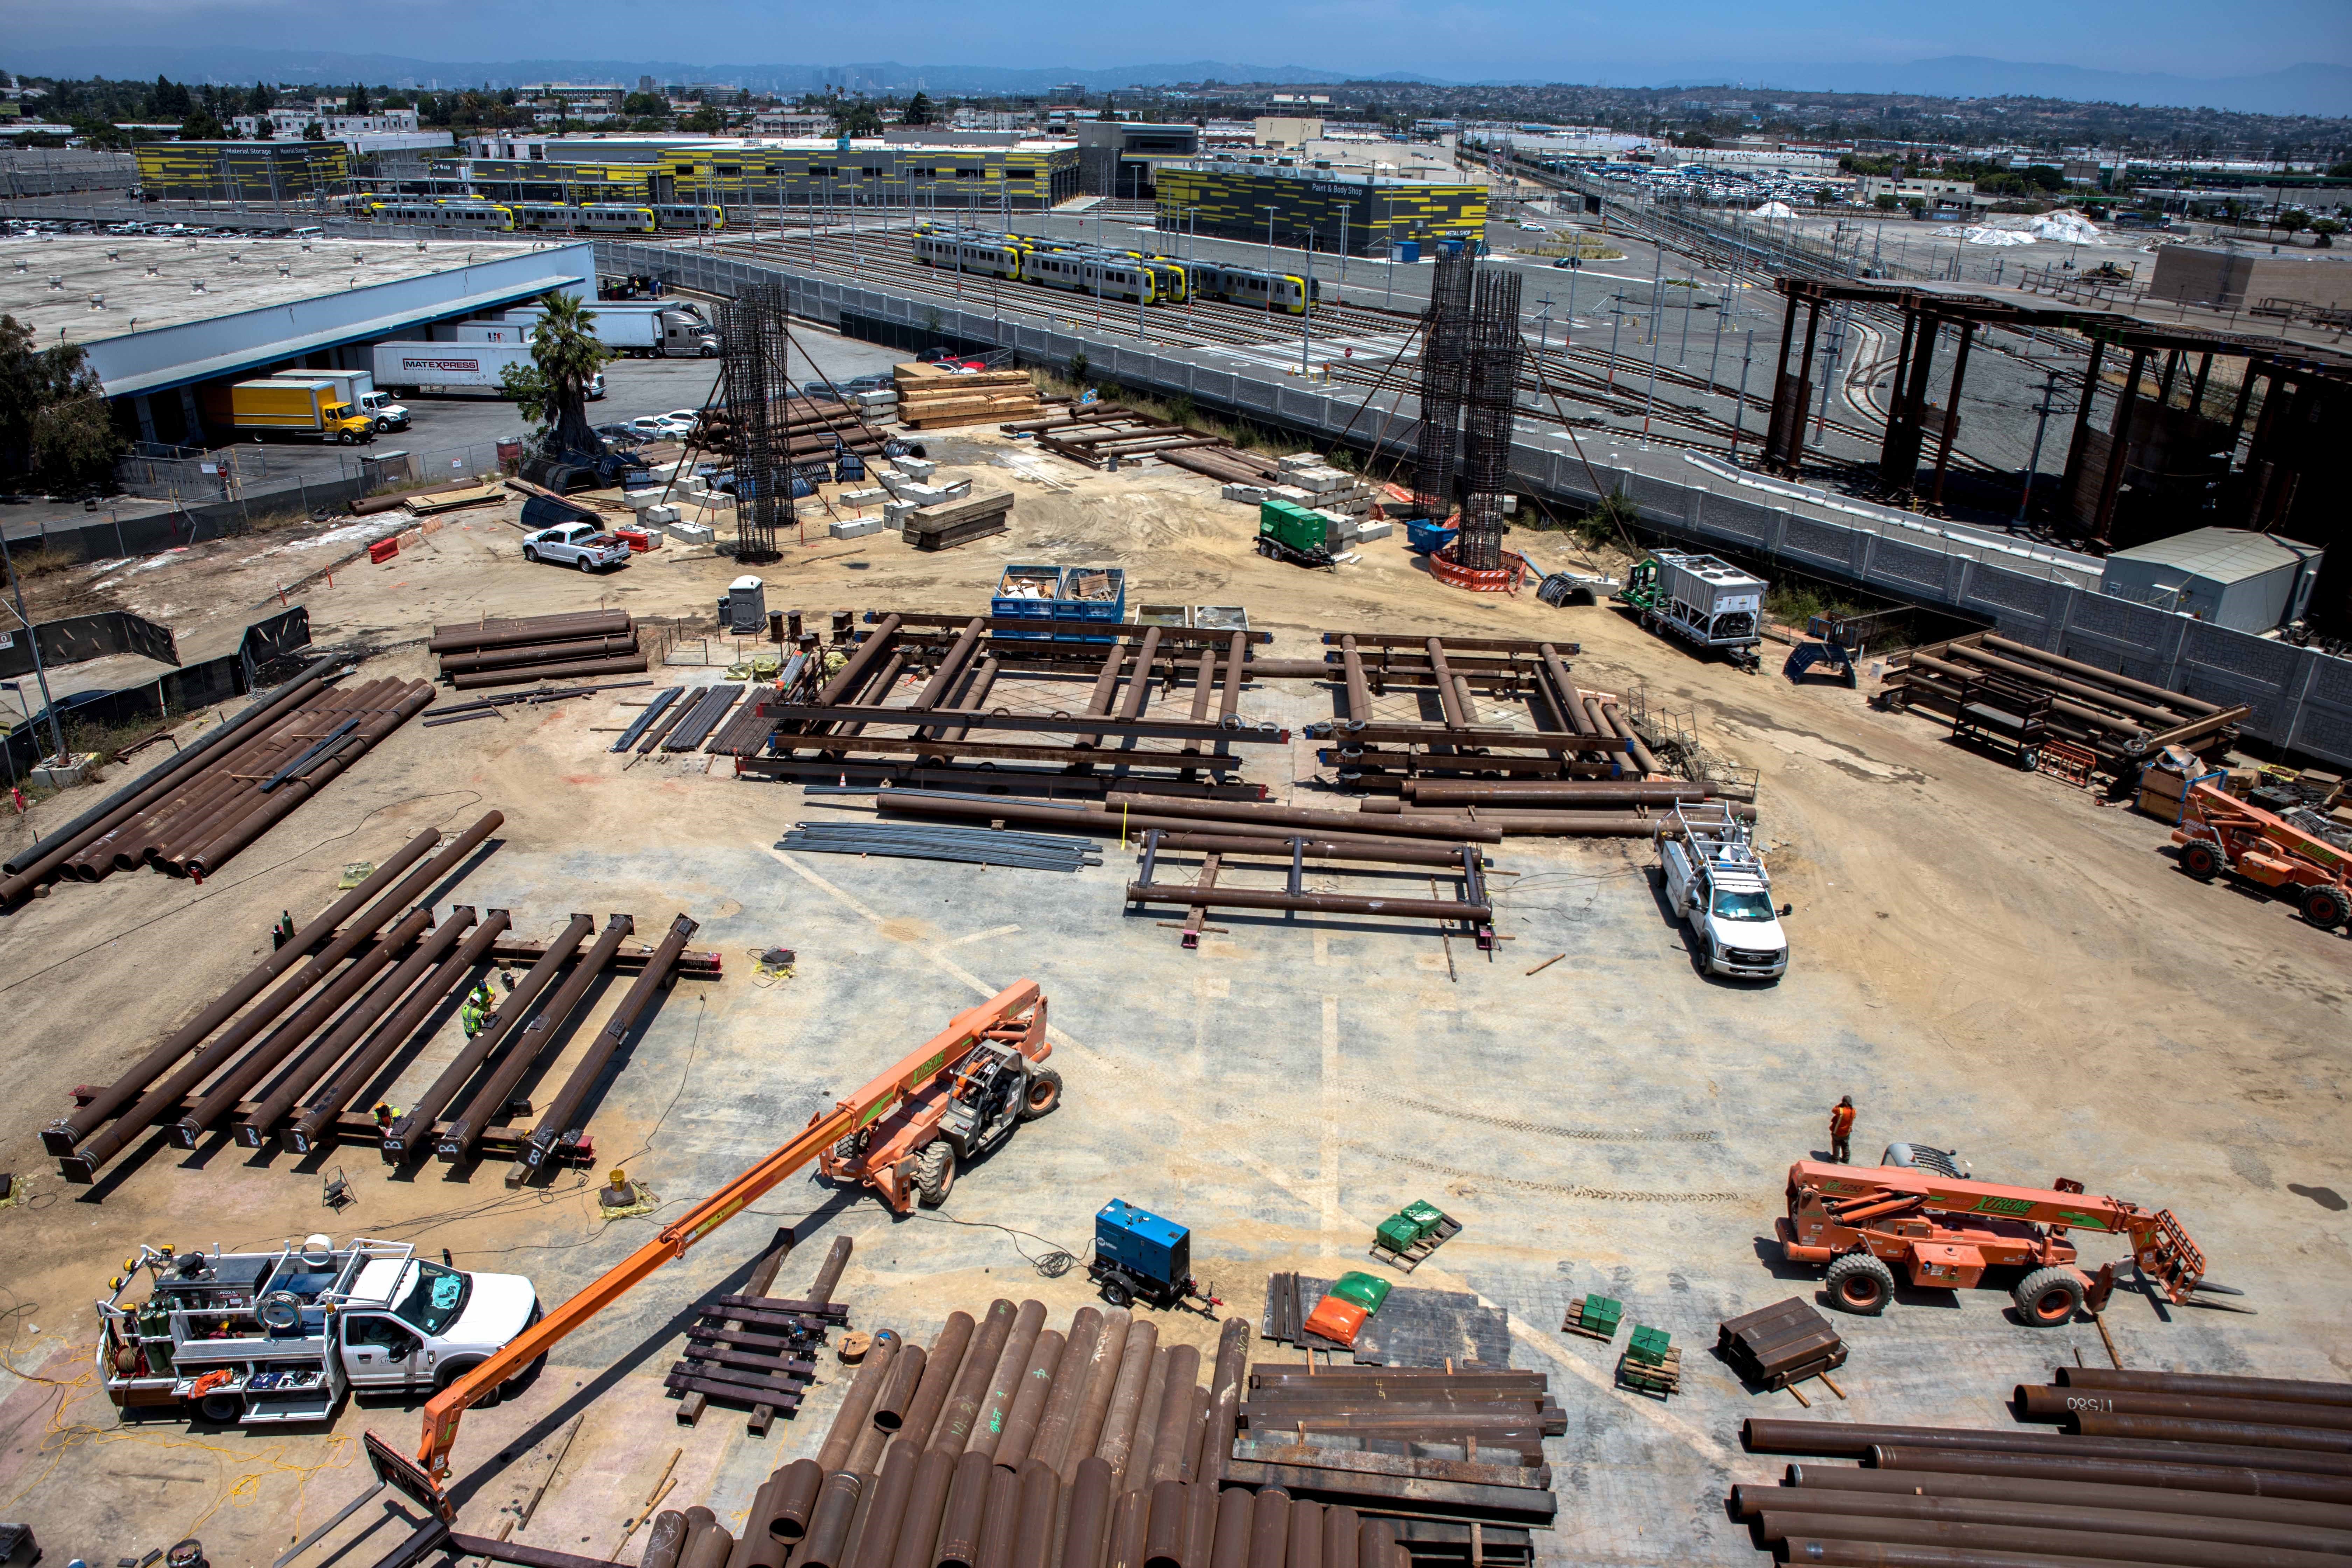 Falsework materials are staged in preparation of guideway construction at the site of the future East-ITF station and the Airport Metro Connector.